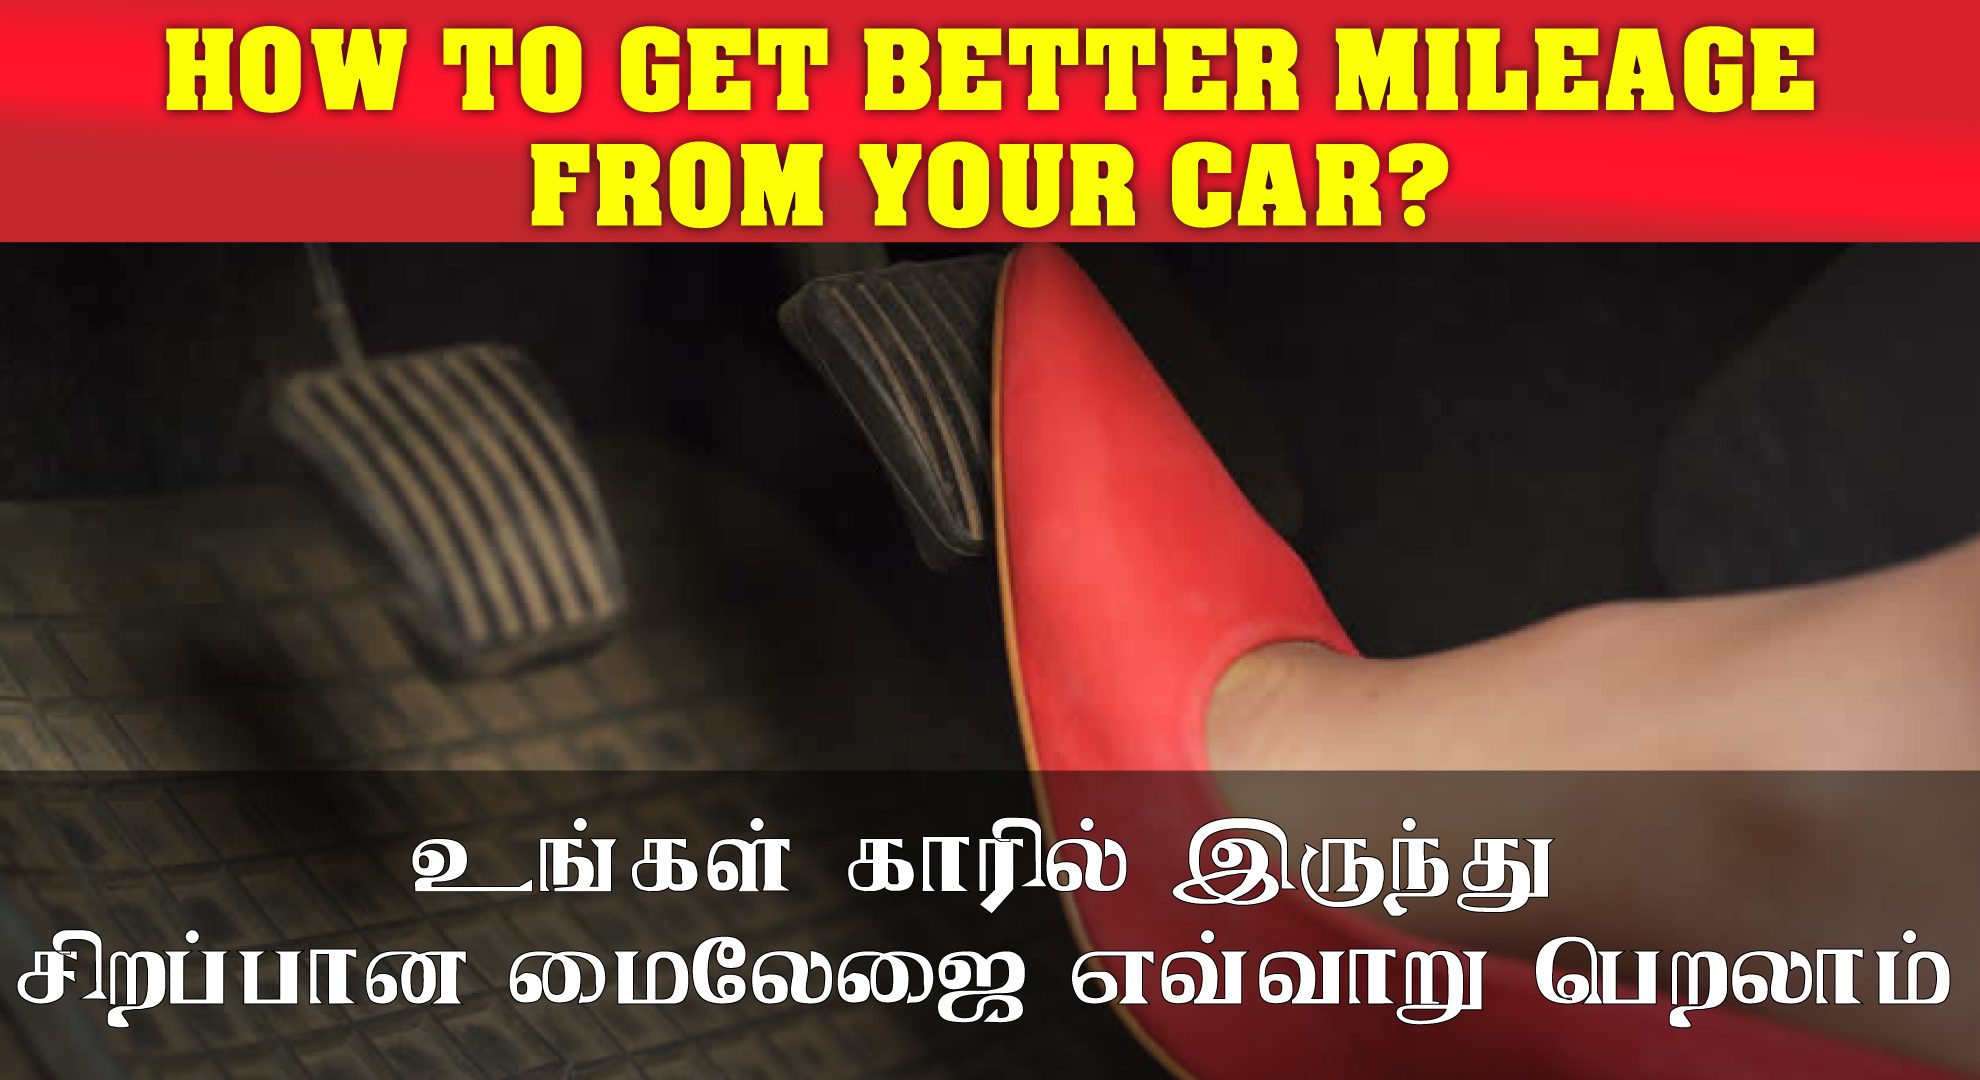 How to get better mileage from your car